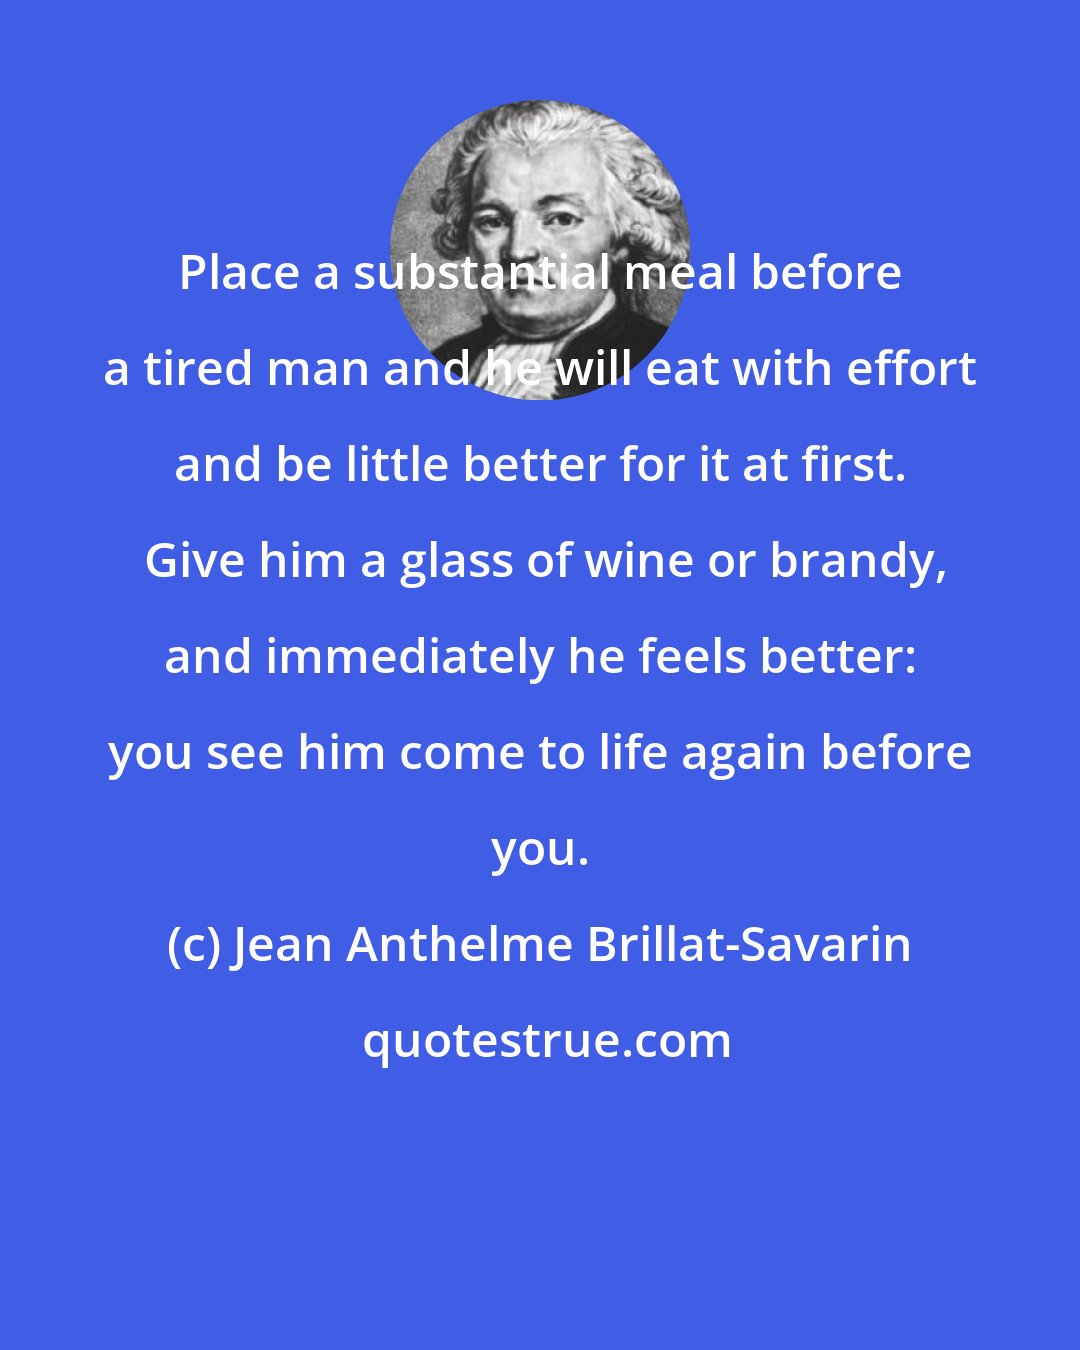 Jean Anthelme Brillat-Savarin: Place a substantial meal before a tired man and he will eat with effort and be little better for it at first.  Give him a glass of wine or brandy, and immediately he feels better: you see him come to life again before you.